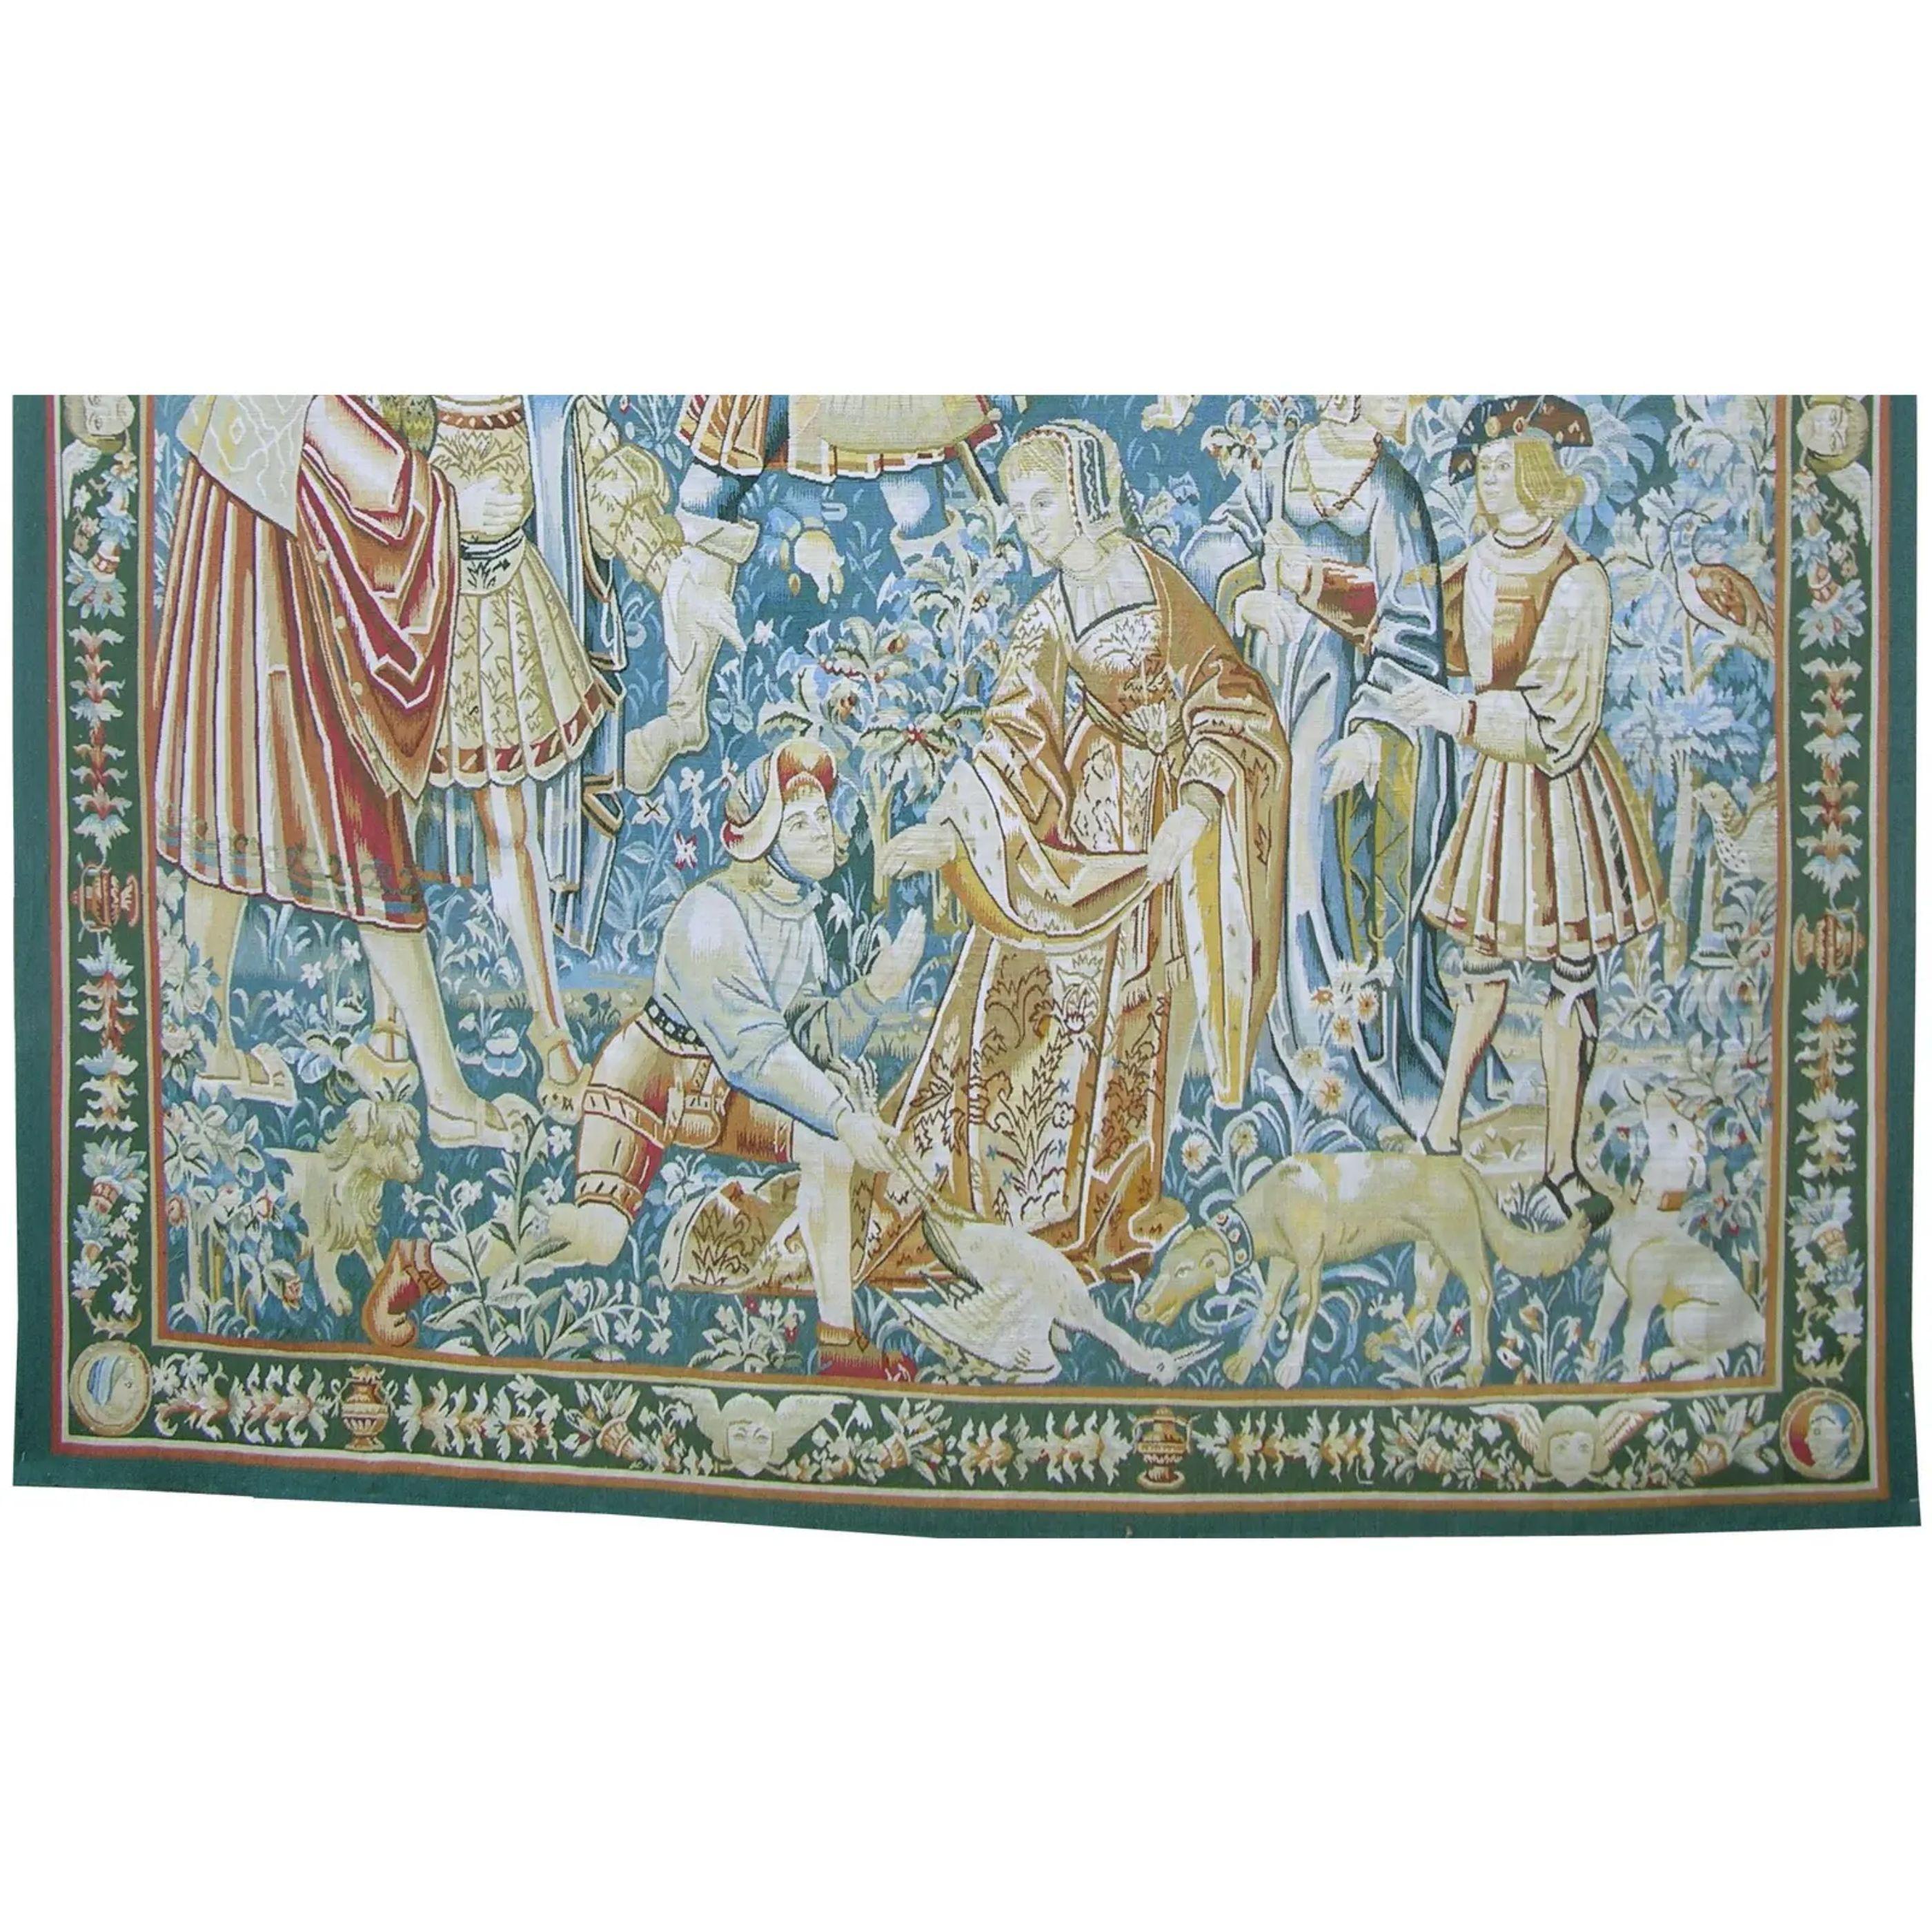 Unknown Vintage Tapestry Depicting Royalty 6.0X6.11 For Sale